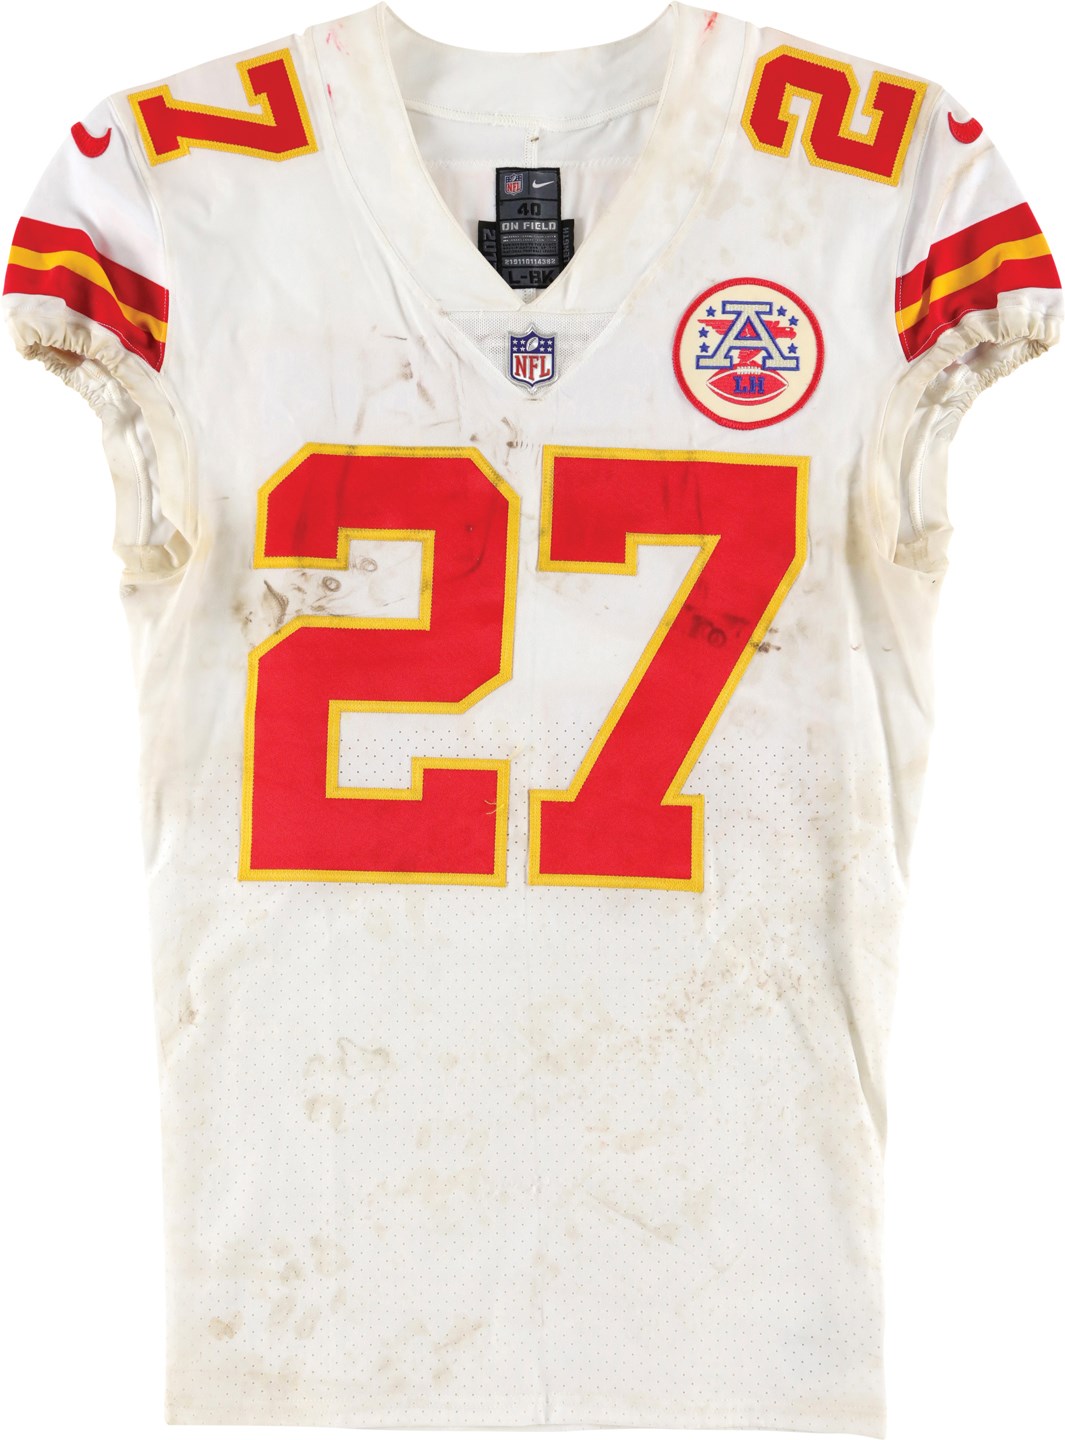 - 2017 Kareem Hunt Rookie Kansas City Chiefs Unwashed Game Worn Jersey - Photo-Matched to Patrick Mahomes' First Career Start